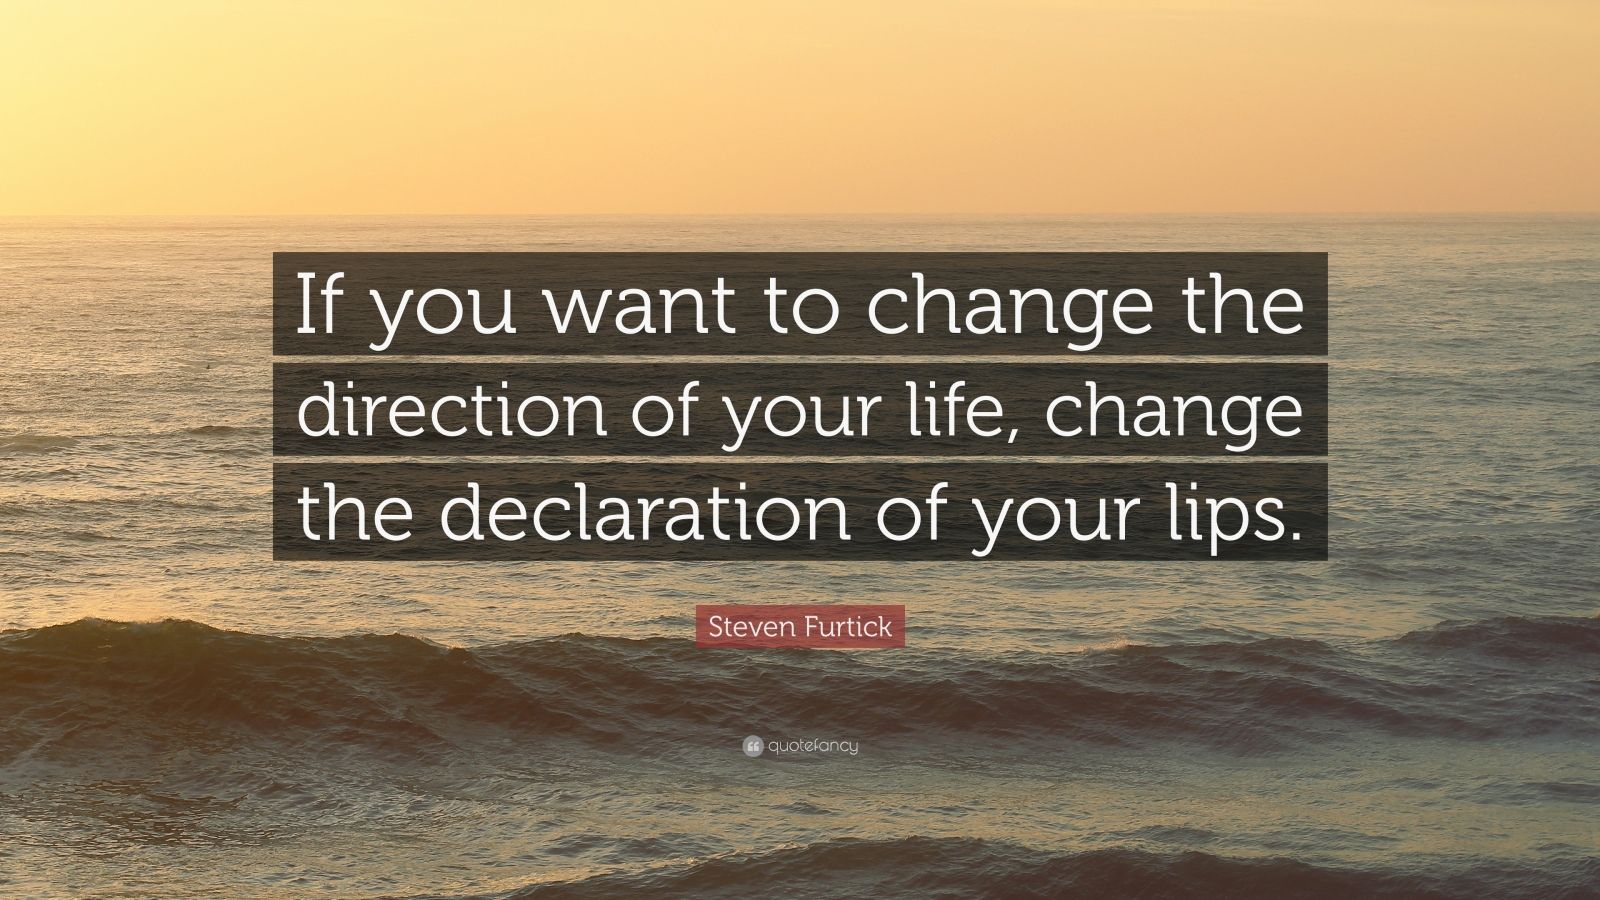 Steven Furtick Quote: “If you want to change the direction of your life,  change the declaration of your lips.” (12 wallpapers) - Quotefancy